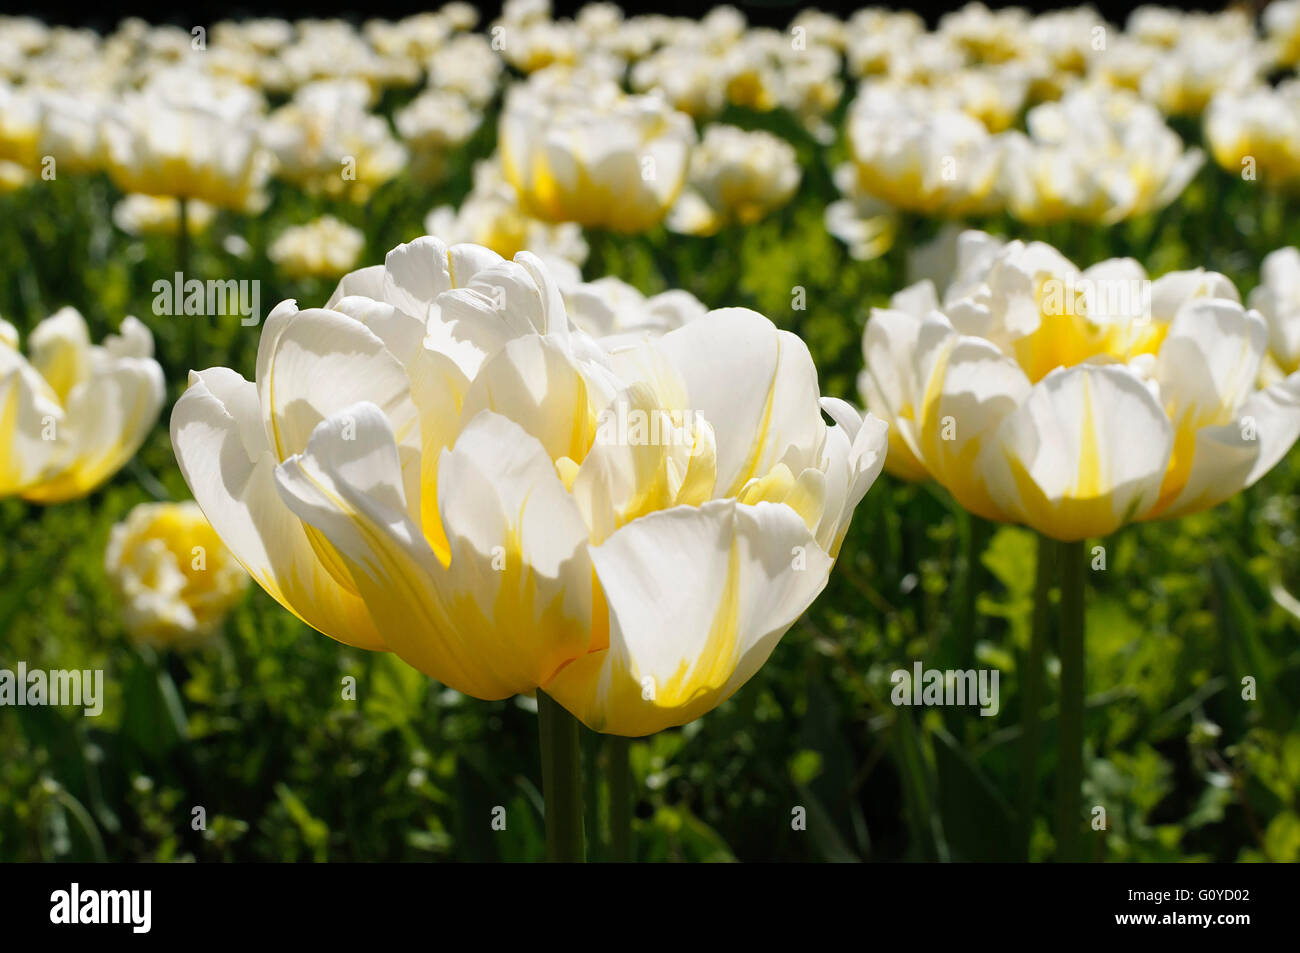 Tulip, Tulipa, Tulipa 'Flaming Evita', Beauty in Nature, Bulb, Colour, Cottage garden plant, Double early tulip, Flower, Spring Flowering, Frost hardy, Growing, Outdoor, Plant, Cream, Stock Photo